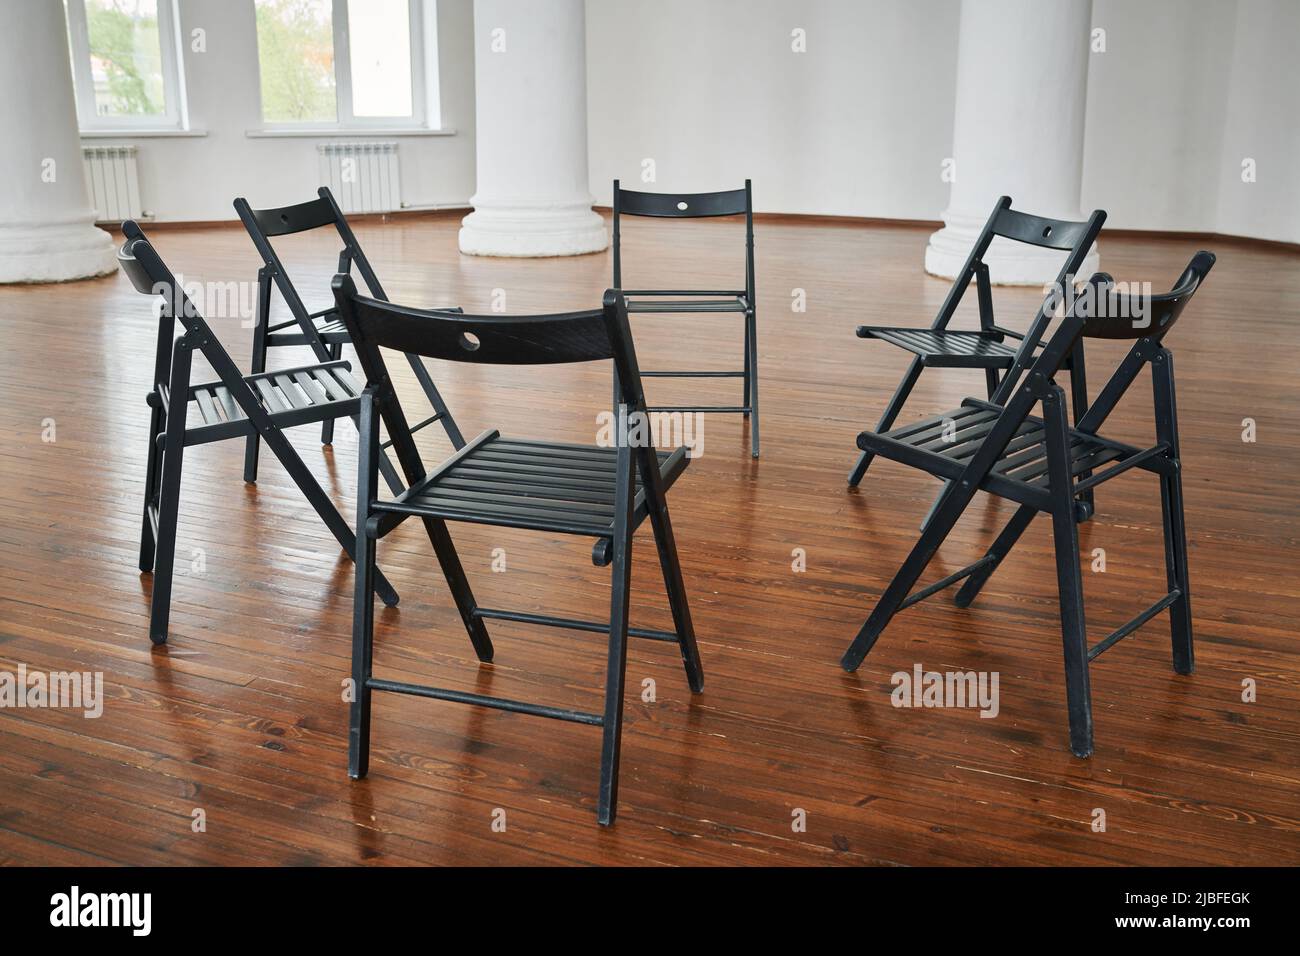 Part of lecture hall or spacious auditorium with group of chairs forming circle prepared for those who attending psychotherapy course Stock Photo